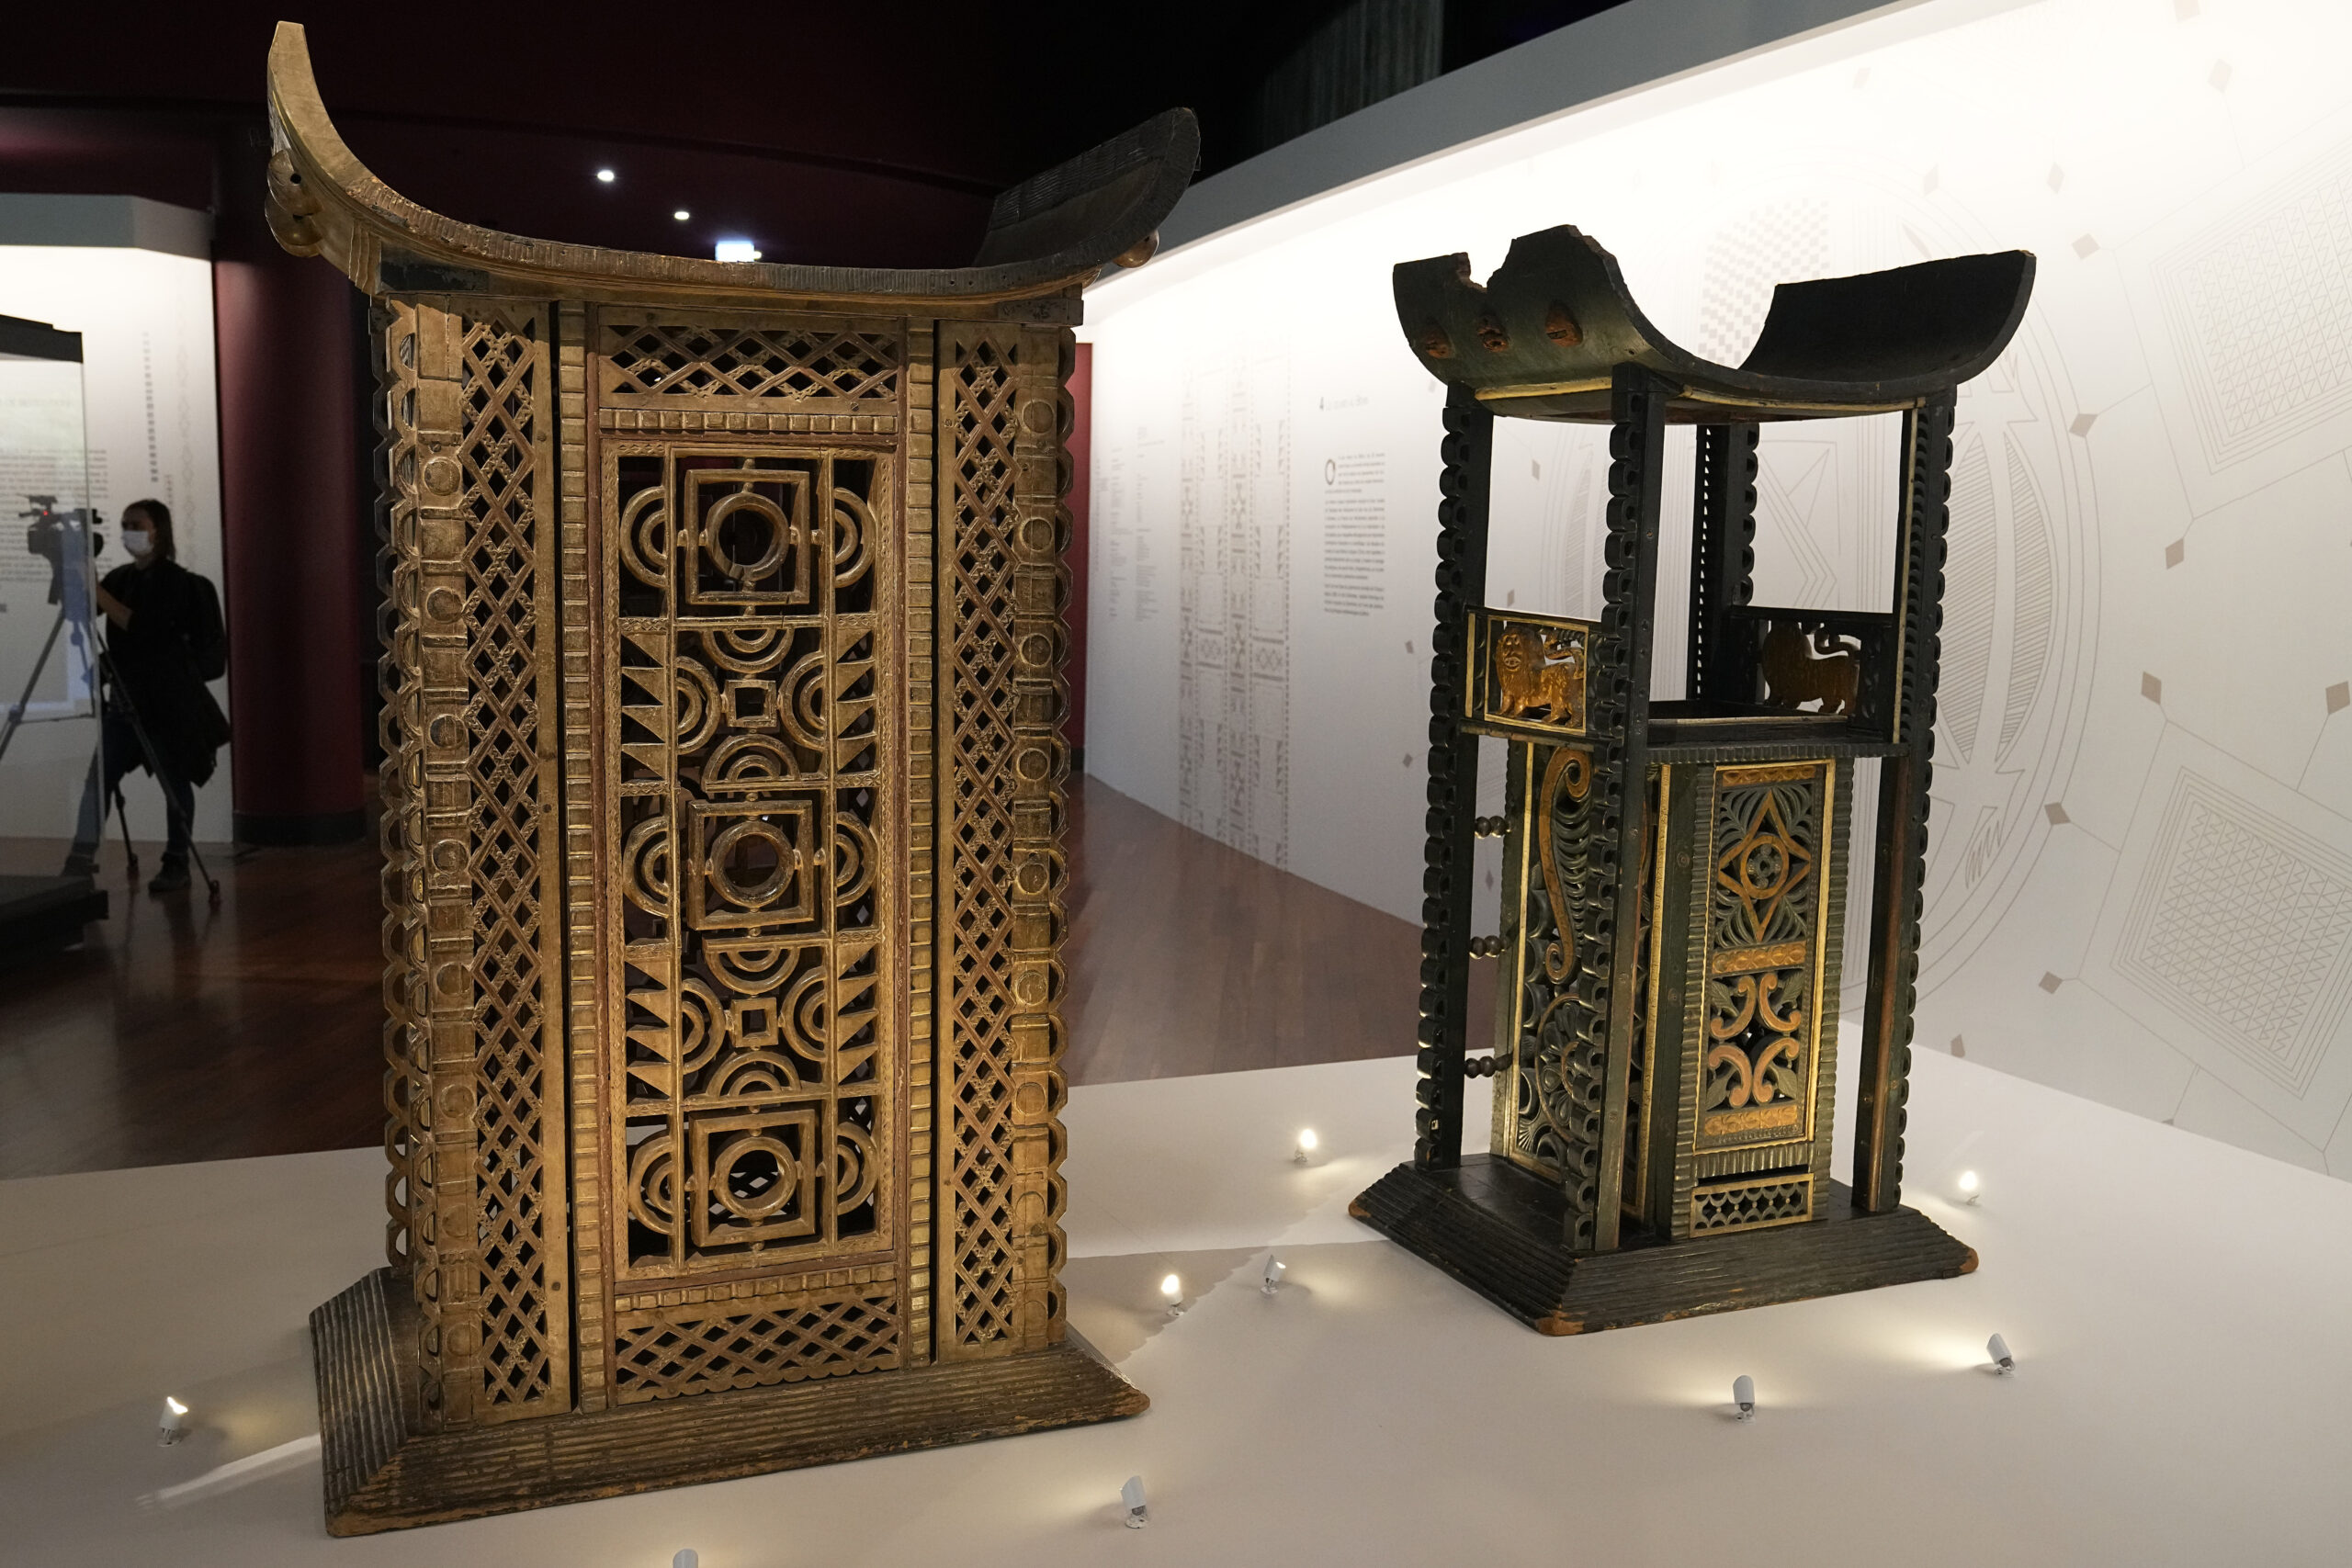 The 19th century Throne of King Ghezo, left, and Throne of King Glele, from Benin, are pictured at the Quai Branly–Jacques Chirac museum, Monday, Oct. 25, 2021 in Paris. n a decision with potential ramifications across European museums, France is displaying 26 looted colonial-era artifacts for one last time before returning them home to Benin. The wooden anthropomorphic statues, royal thrones and sacred altars were pilfered by the French army in the 19th century from Western Africa. (AP Photo/Michel Euler)